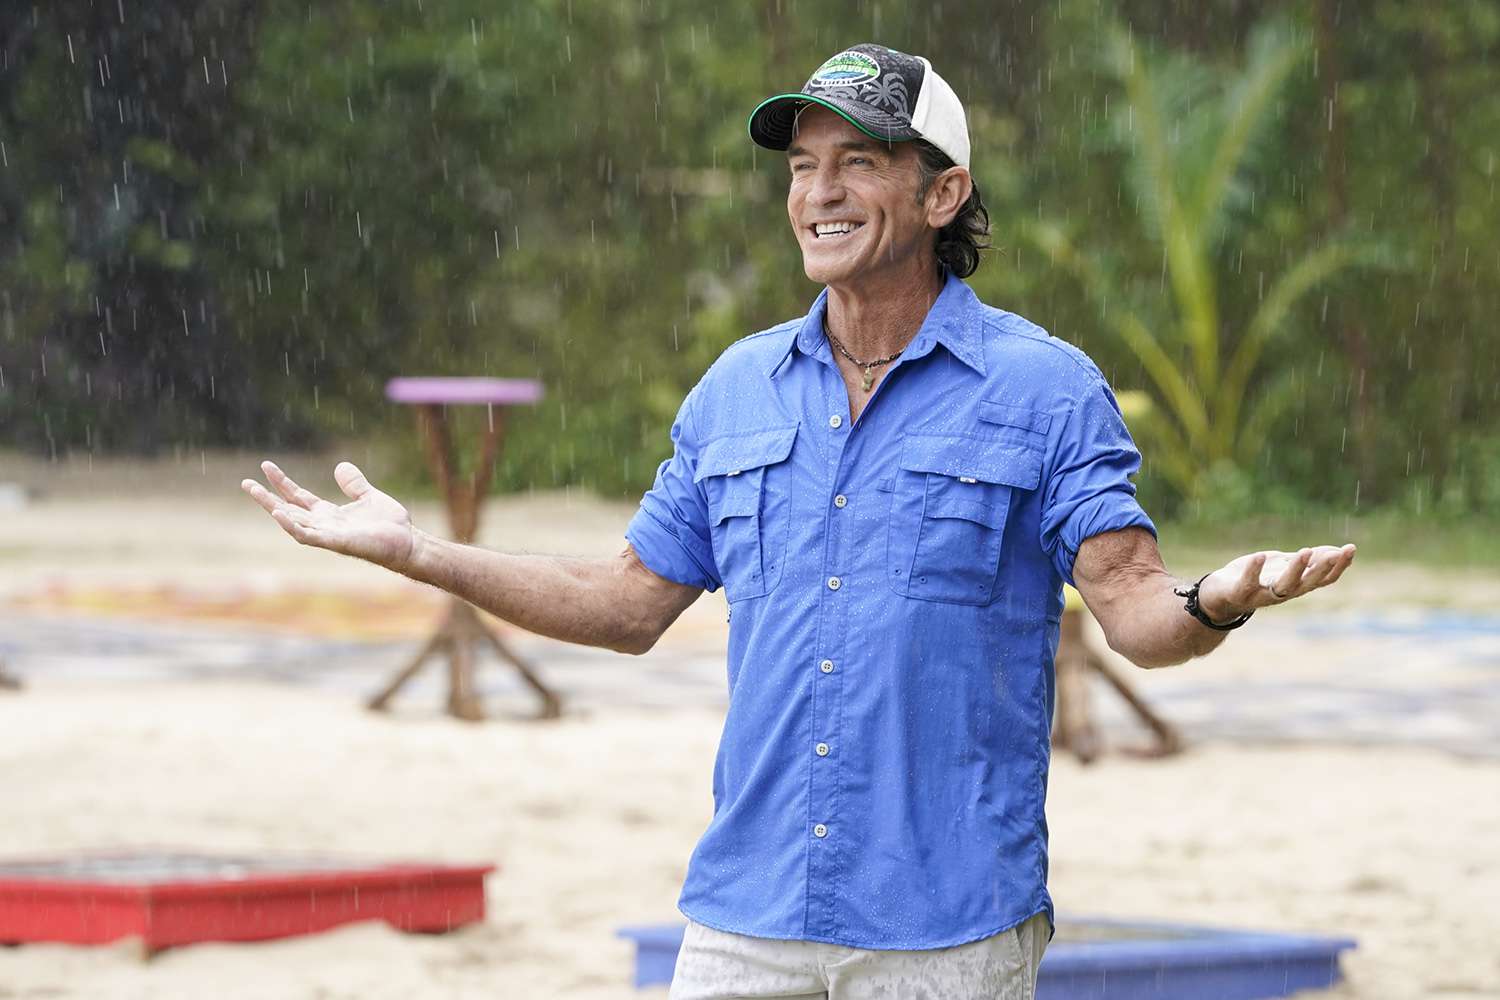 “Tell a Good Lie, Not a Stupid Lie” – One castaway will land a win in the reward challenge, earning a chance to nurture social bonds during a pivotal moment in the game, on the CBS Original series SURVIVOR, Wednesday, May 4 (8:00-9:00 PM, ET/PT) on the CBS Television Network, and available to stream live and on demand on Paramount+. Pictured (L-R): Jeff Probst. Photo: Robert Voets/CBS Entertainment 2021 CBS Broadcasting, Inc. All Rights Reserved.